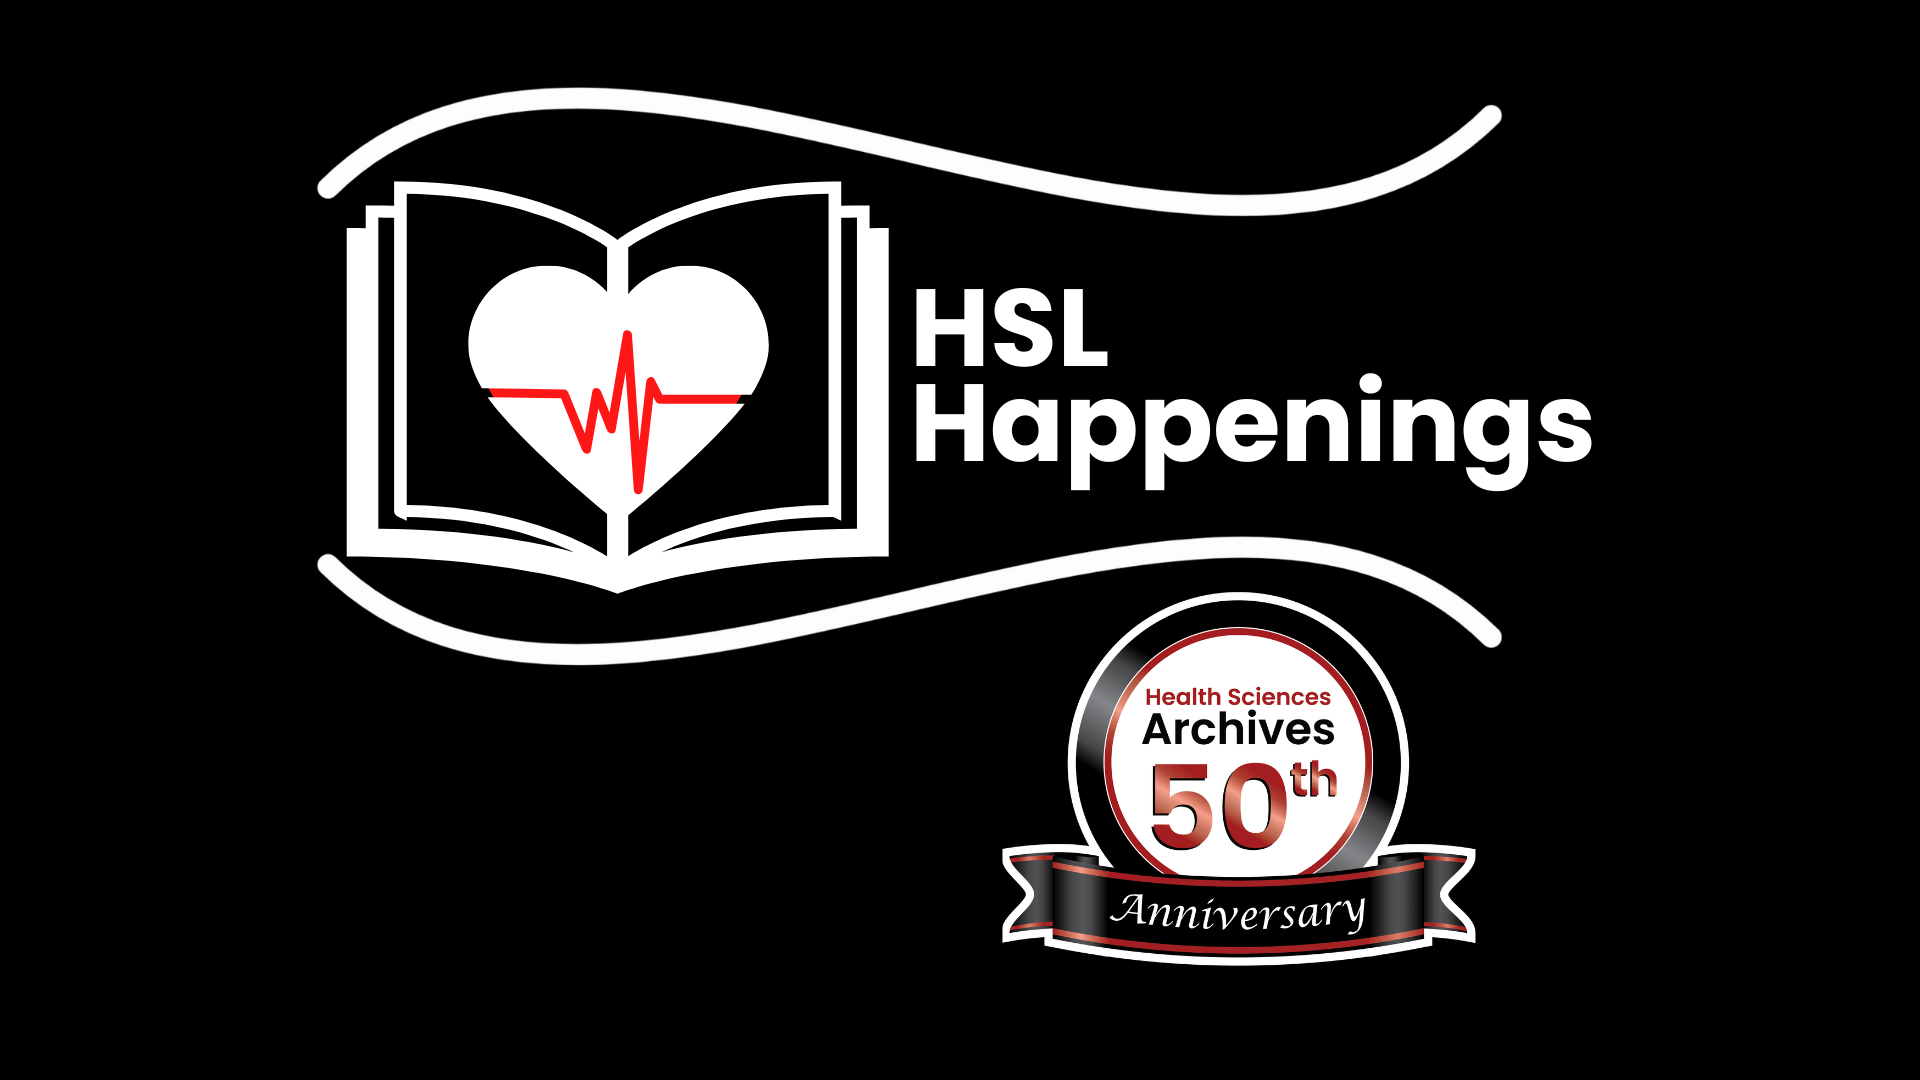 HSl Happenings logo, and 50th Anniversary of the Health Sciences Archives icon.